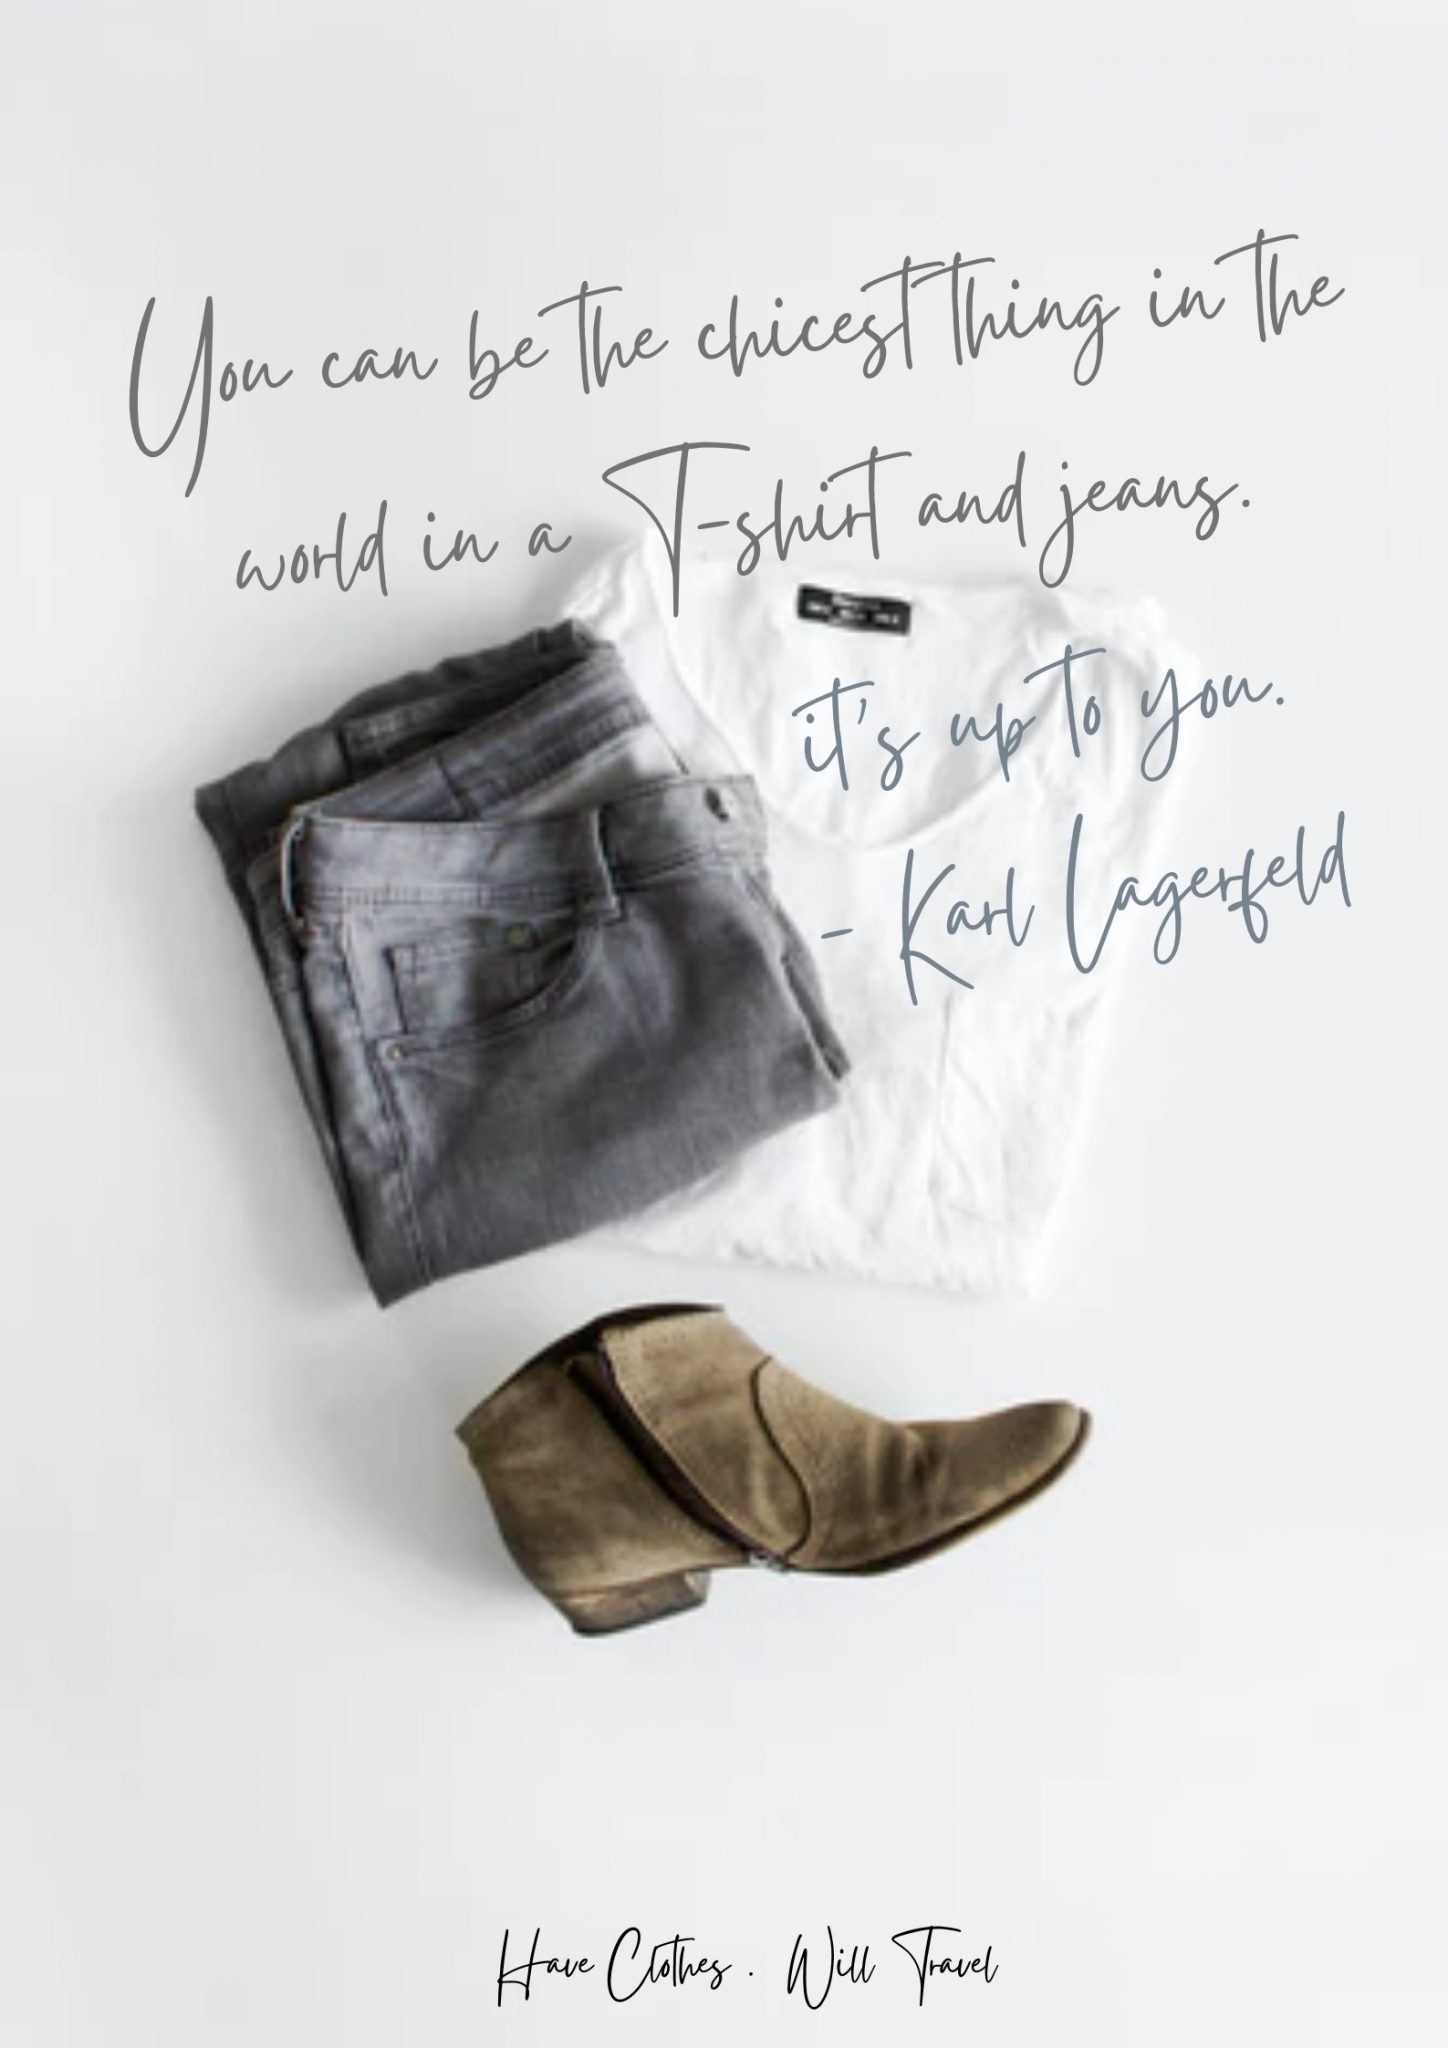 A simple photo of a pair of jeans, a white shirt, and a single women's brown boot neatly pictured on a white background. Text across the image says, "You can be the chicest thing in the world in a t-shirt and jeans. It's up to you. - Karl Lagerfeld"